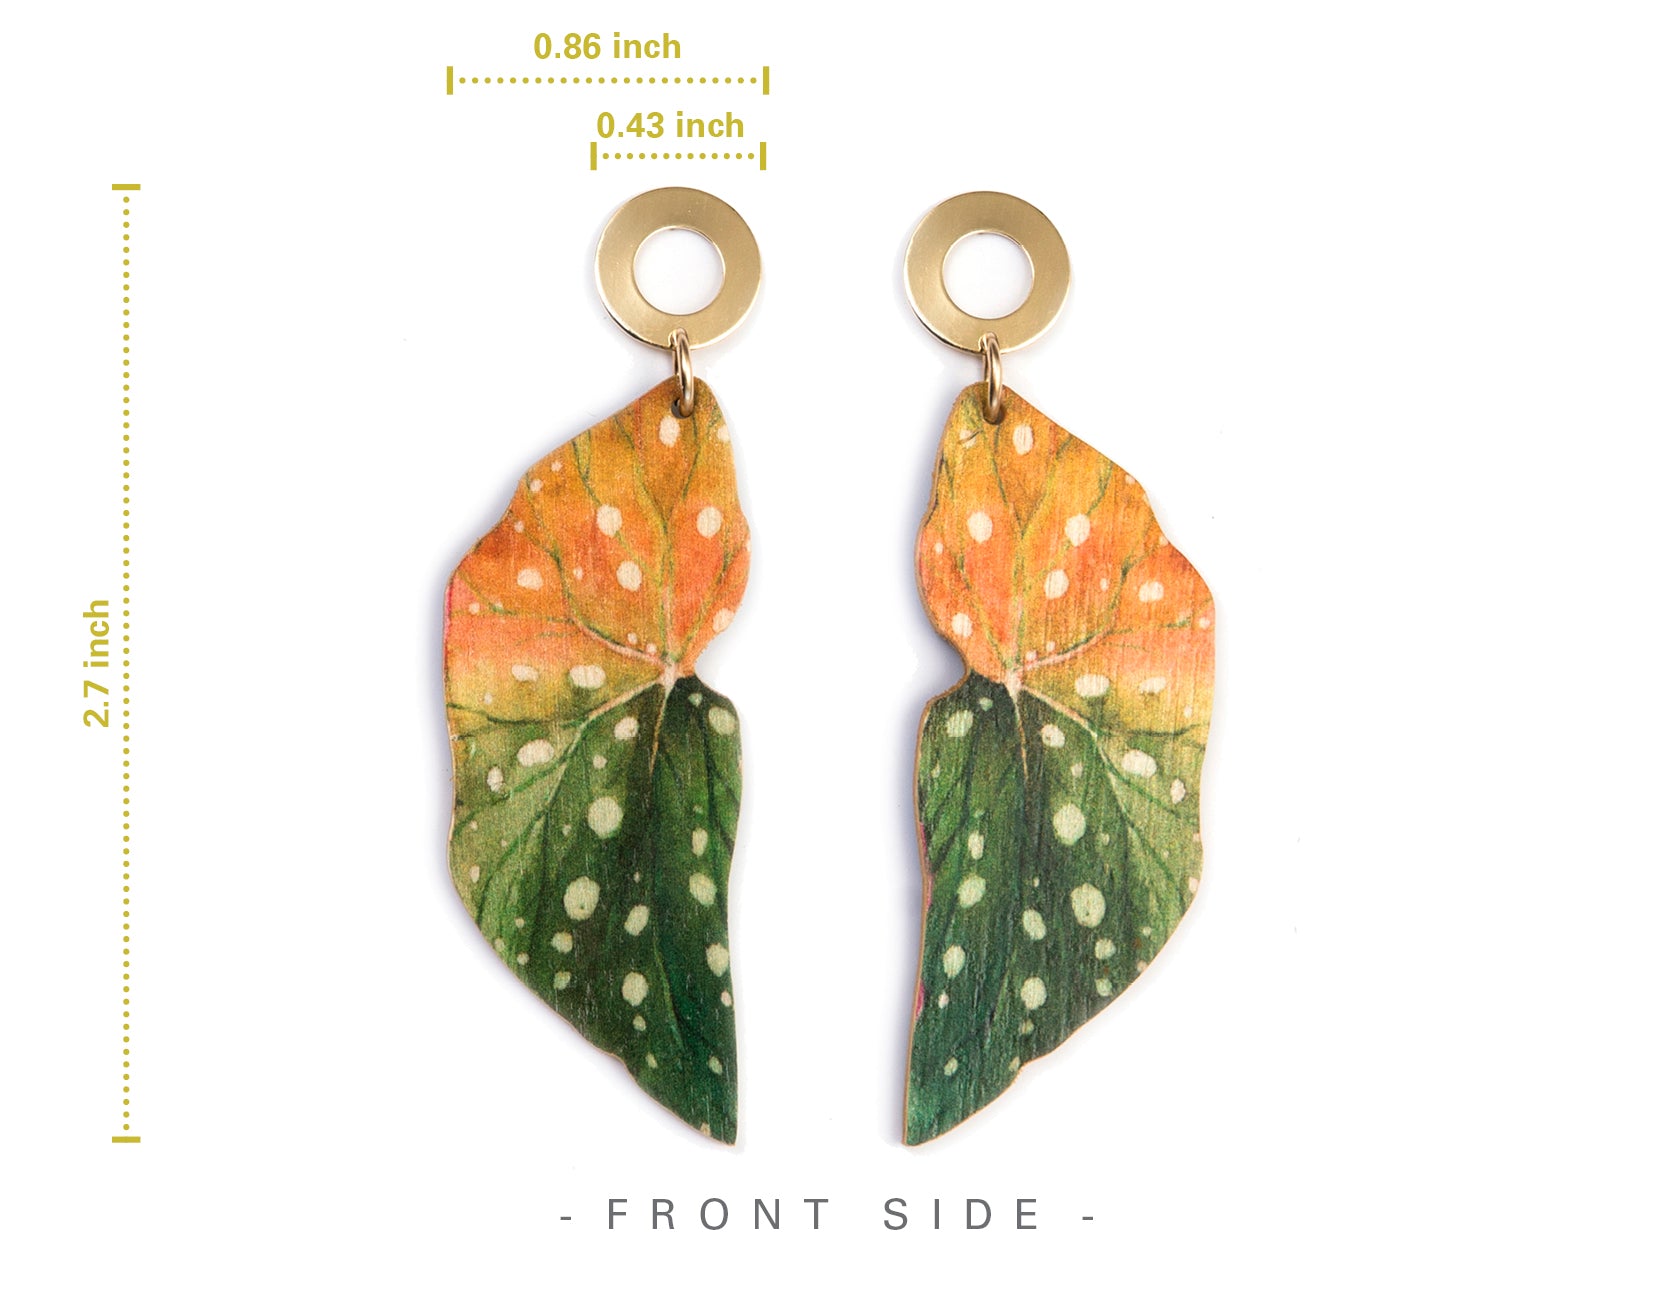 Buy Online Premium Quality Plant Earrings For Plant Lover - Plant Lady Gift - Begonia Maculata Earrings, Urban Jungle Life